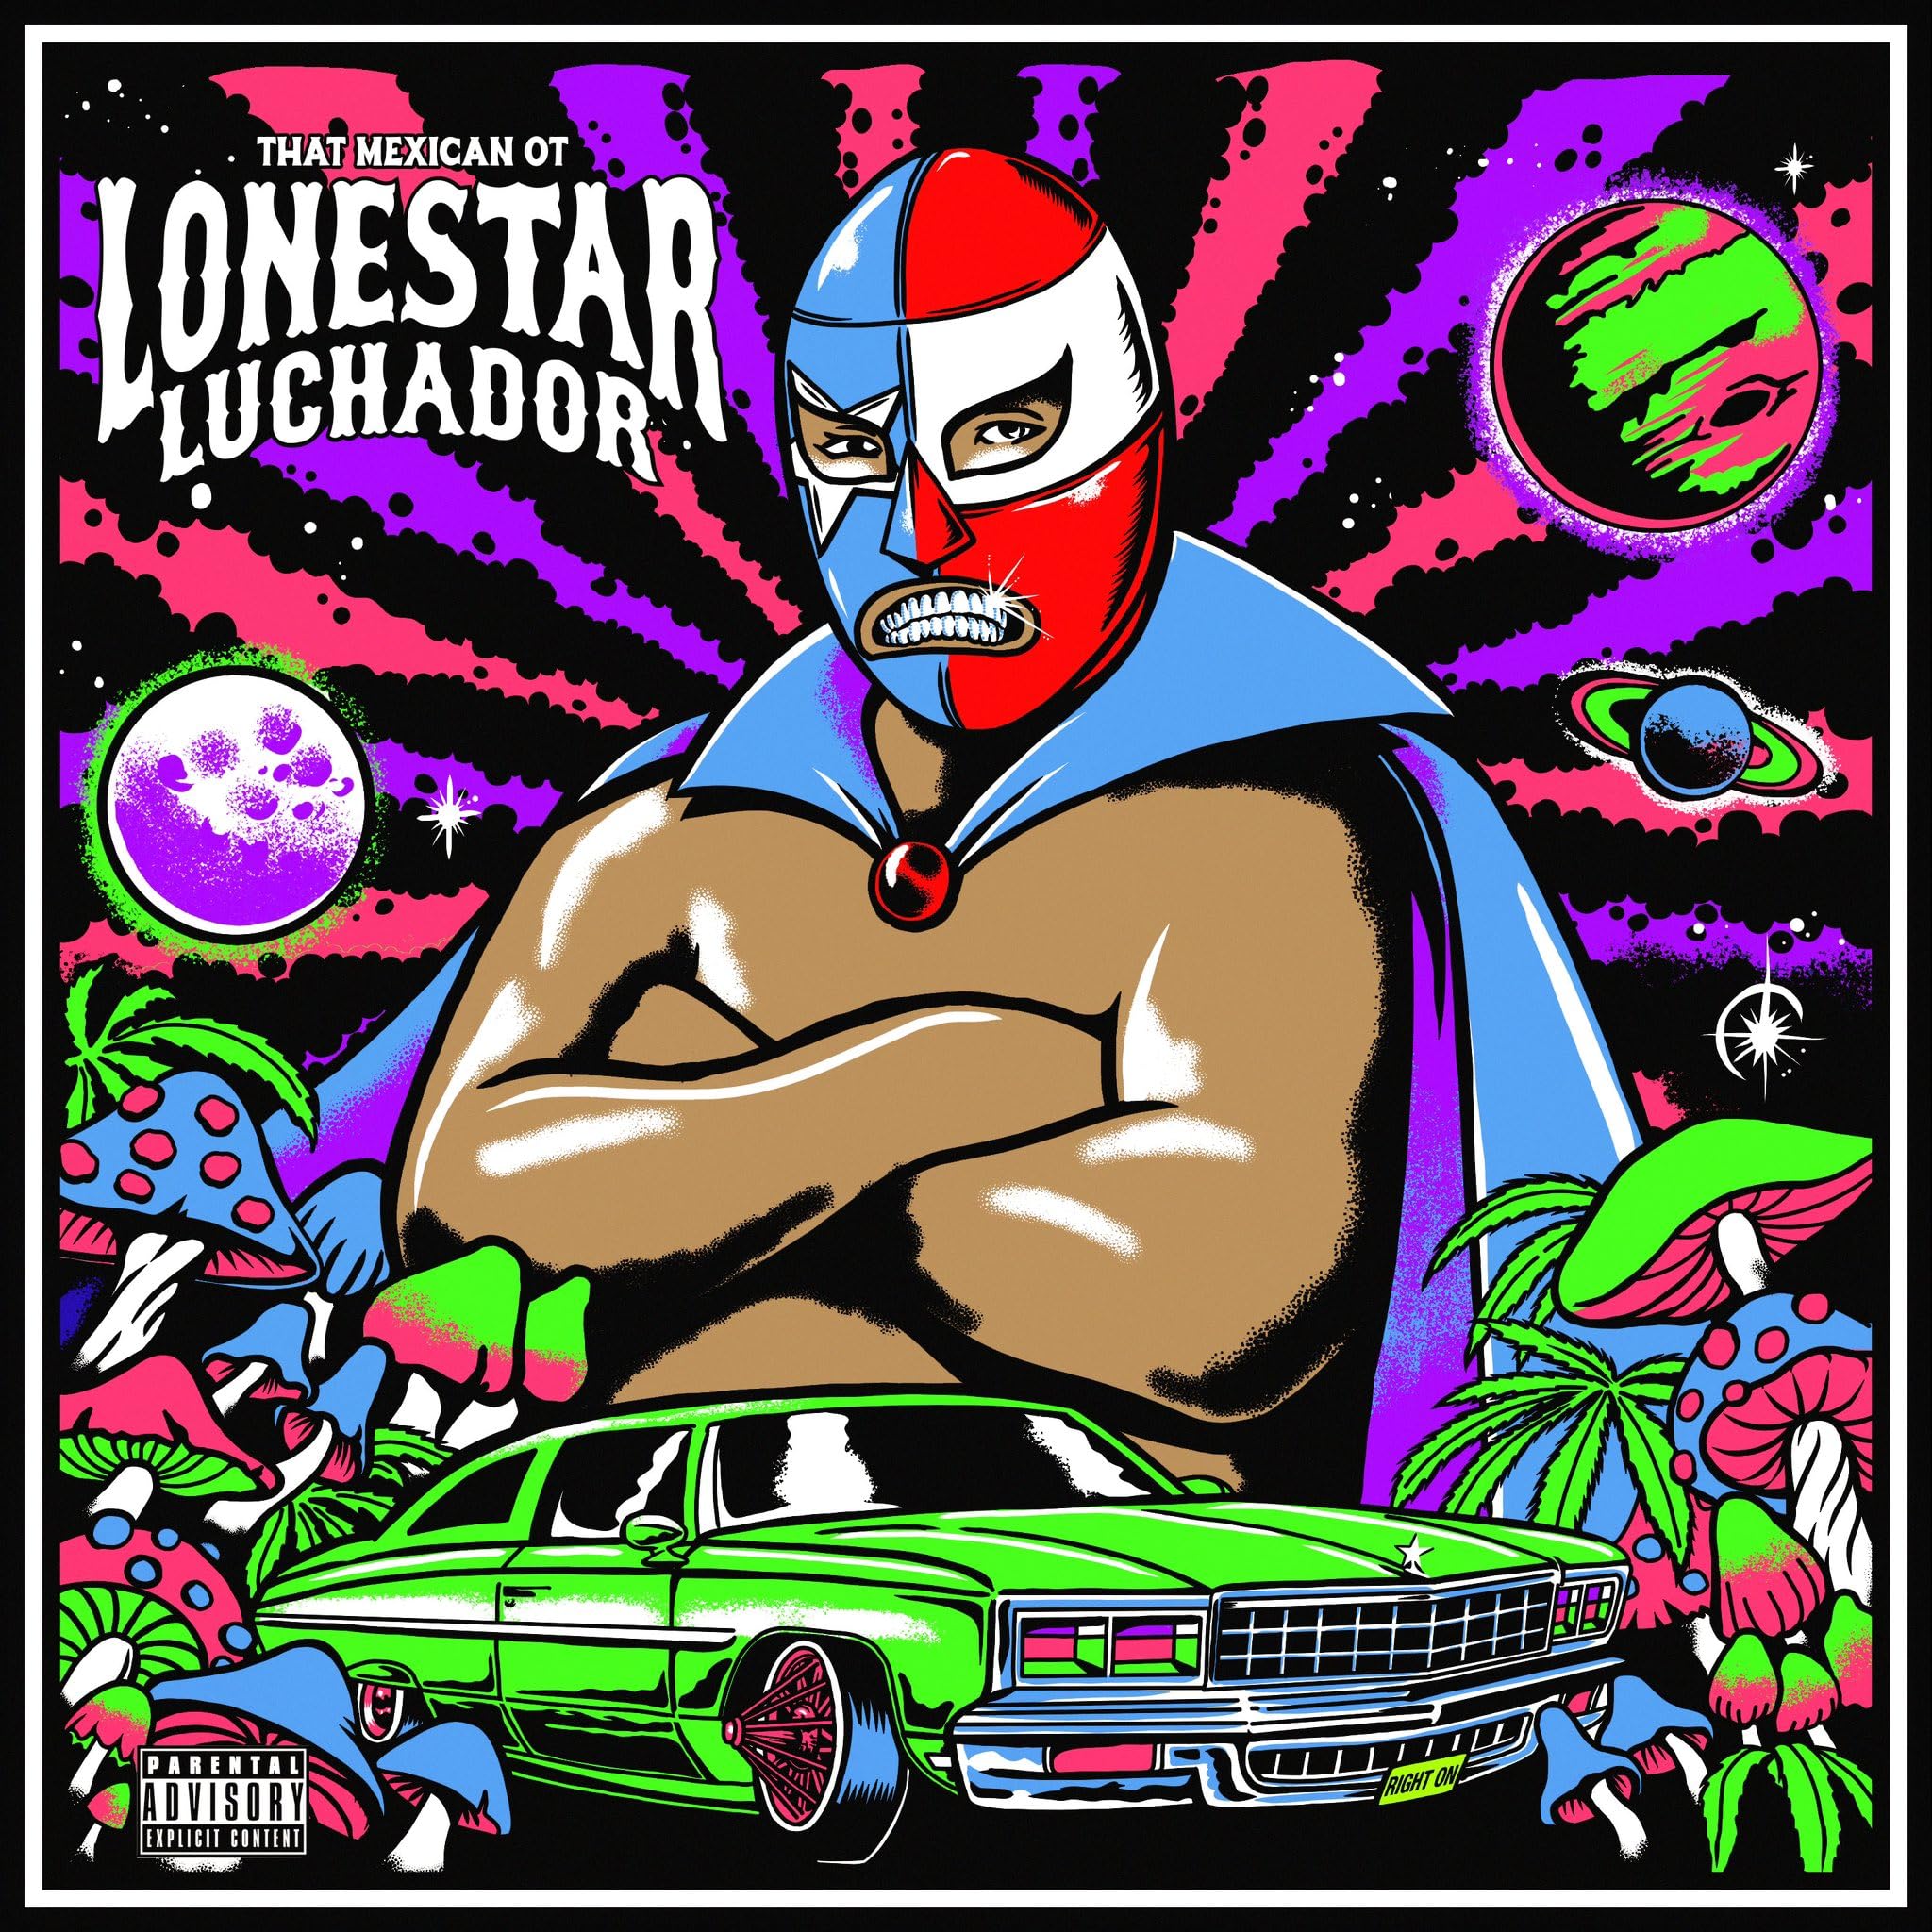 That Mexican OT (Lonestar Luchardor) Inches: Posters & Prints